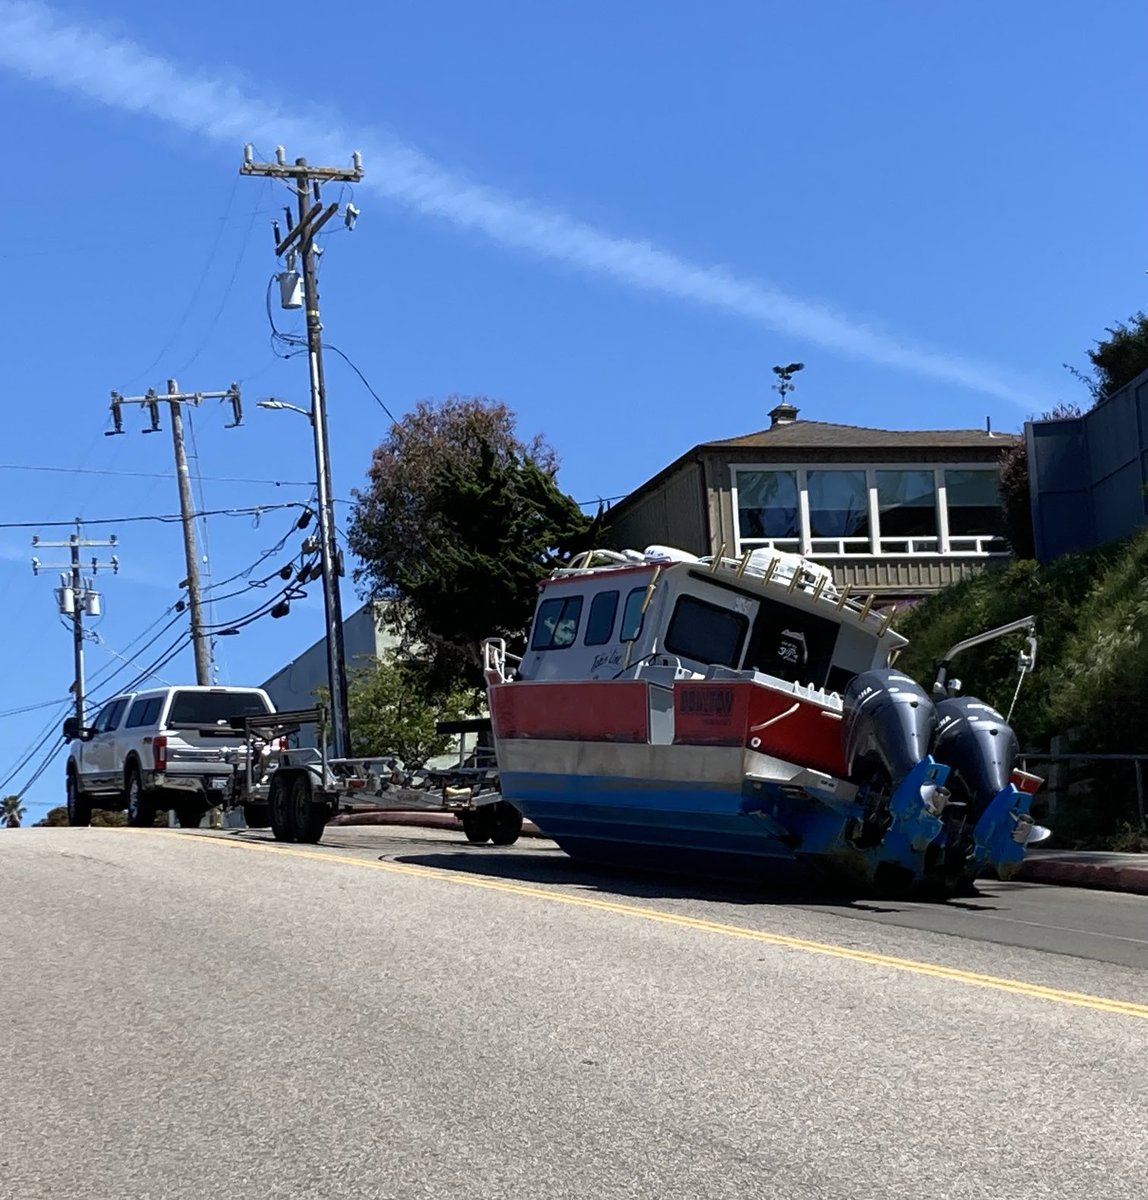 If you think you’re having a bad day, at least you’re not having this guy’s bad day. Remember, tie it down before heading up a hill. #morrobay #thisiswhereilive